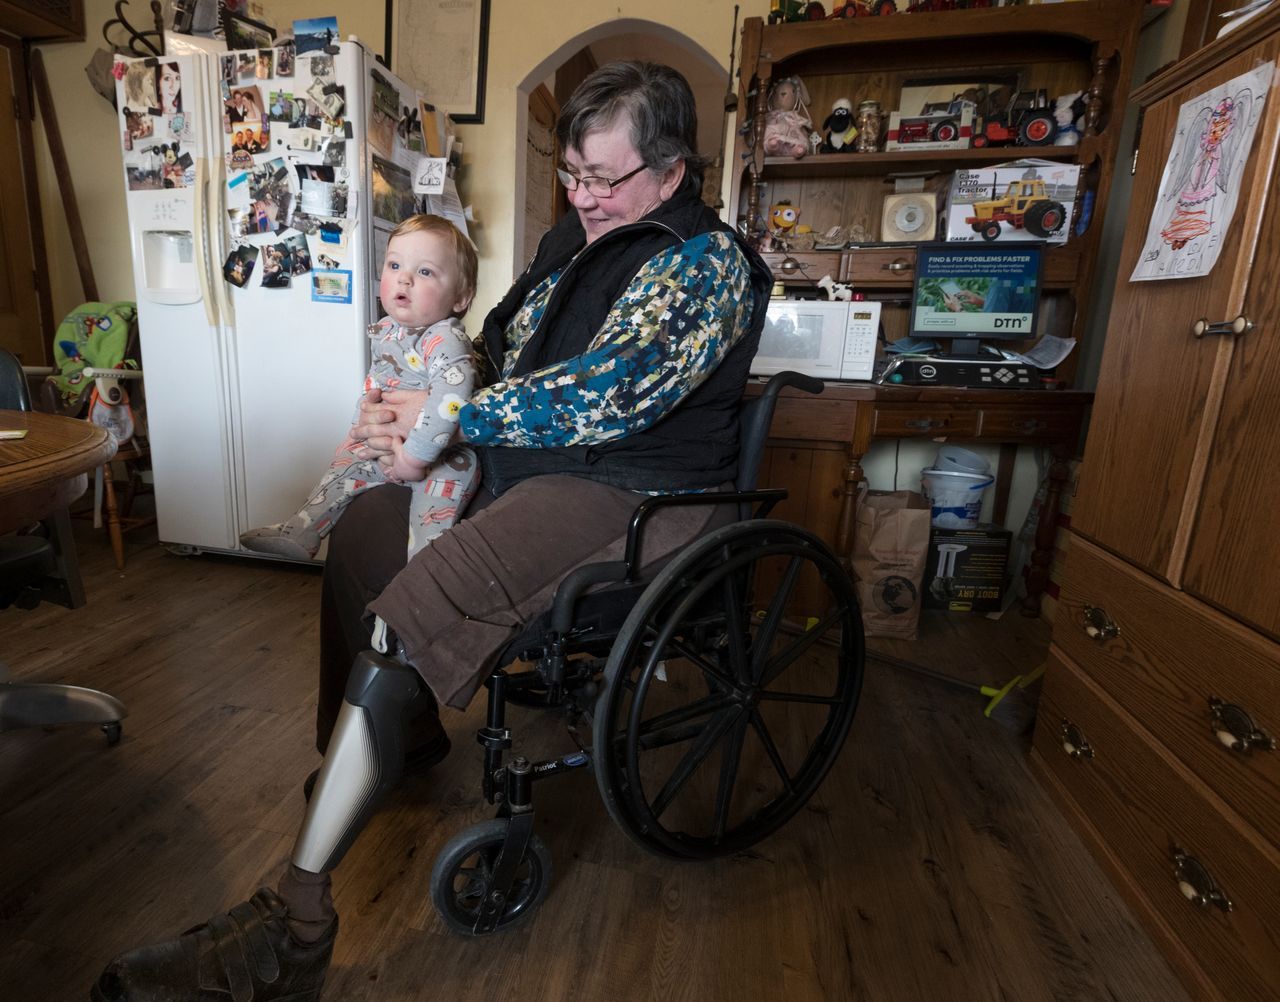 Cathy Mess holds her 10-month-old grandson, Ben. Mess used to help with many of the chores on the farm before she lost her left leg in a farm accident. Image by Mark Hoffman. United States, 2019.